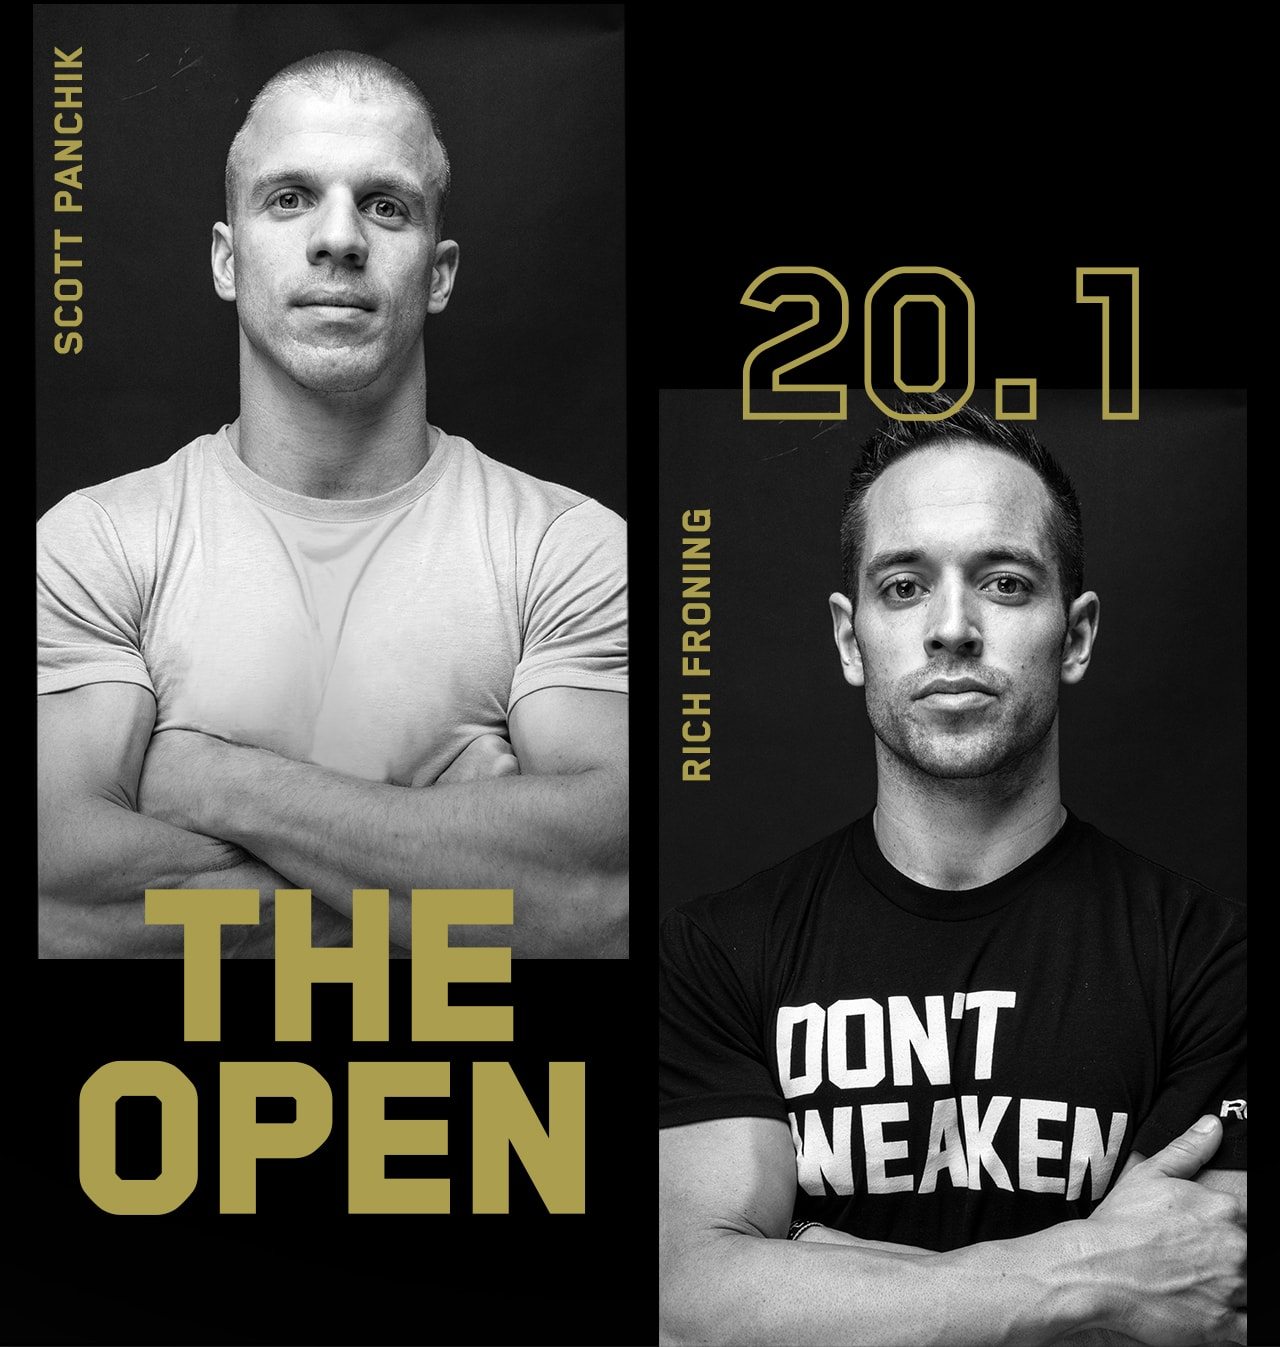 The Open 20.1